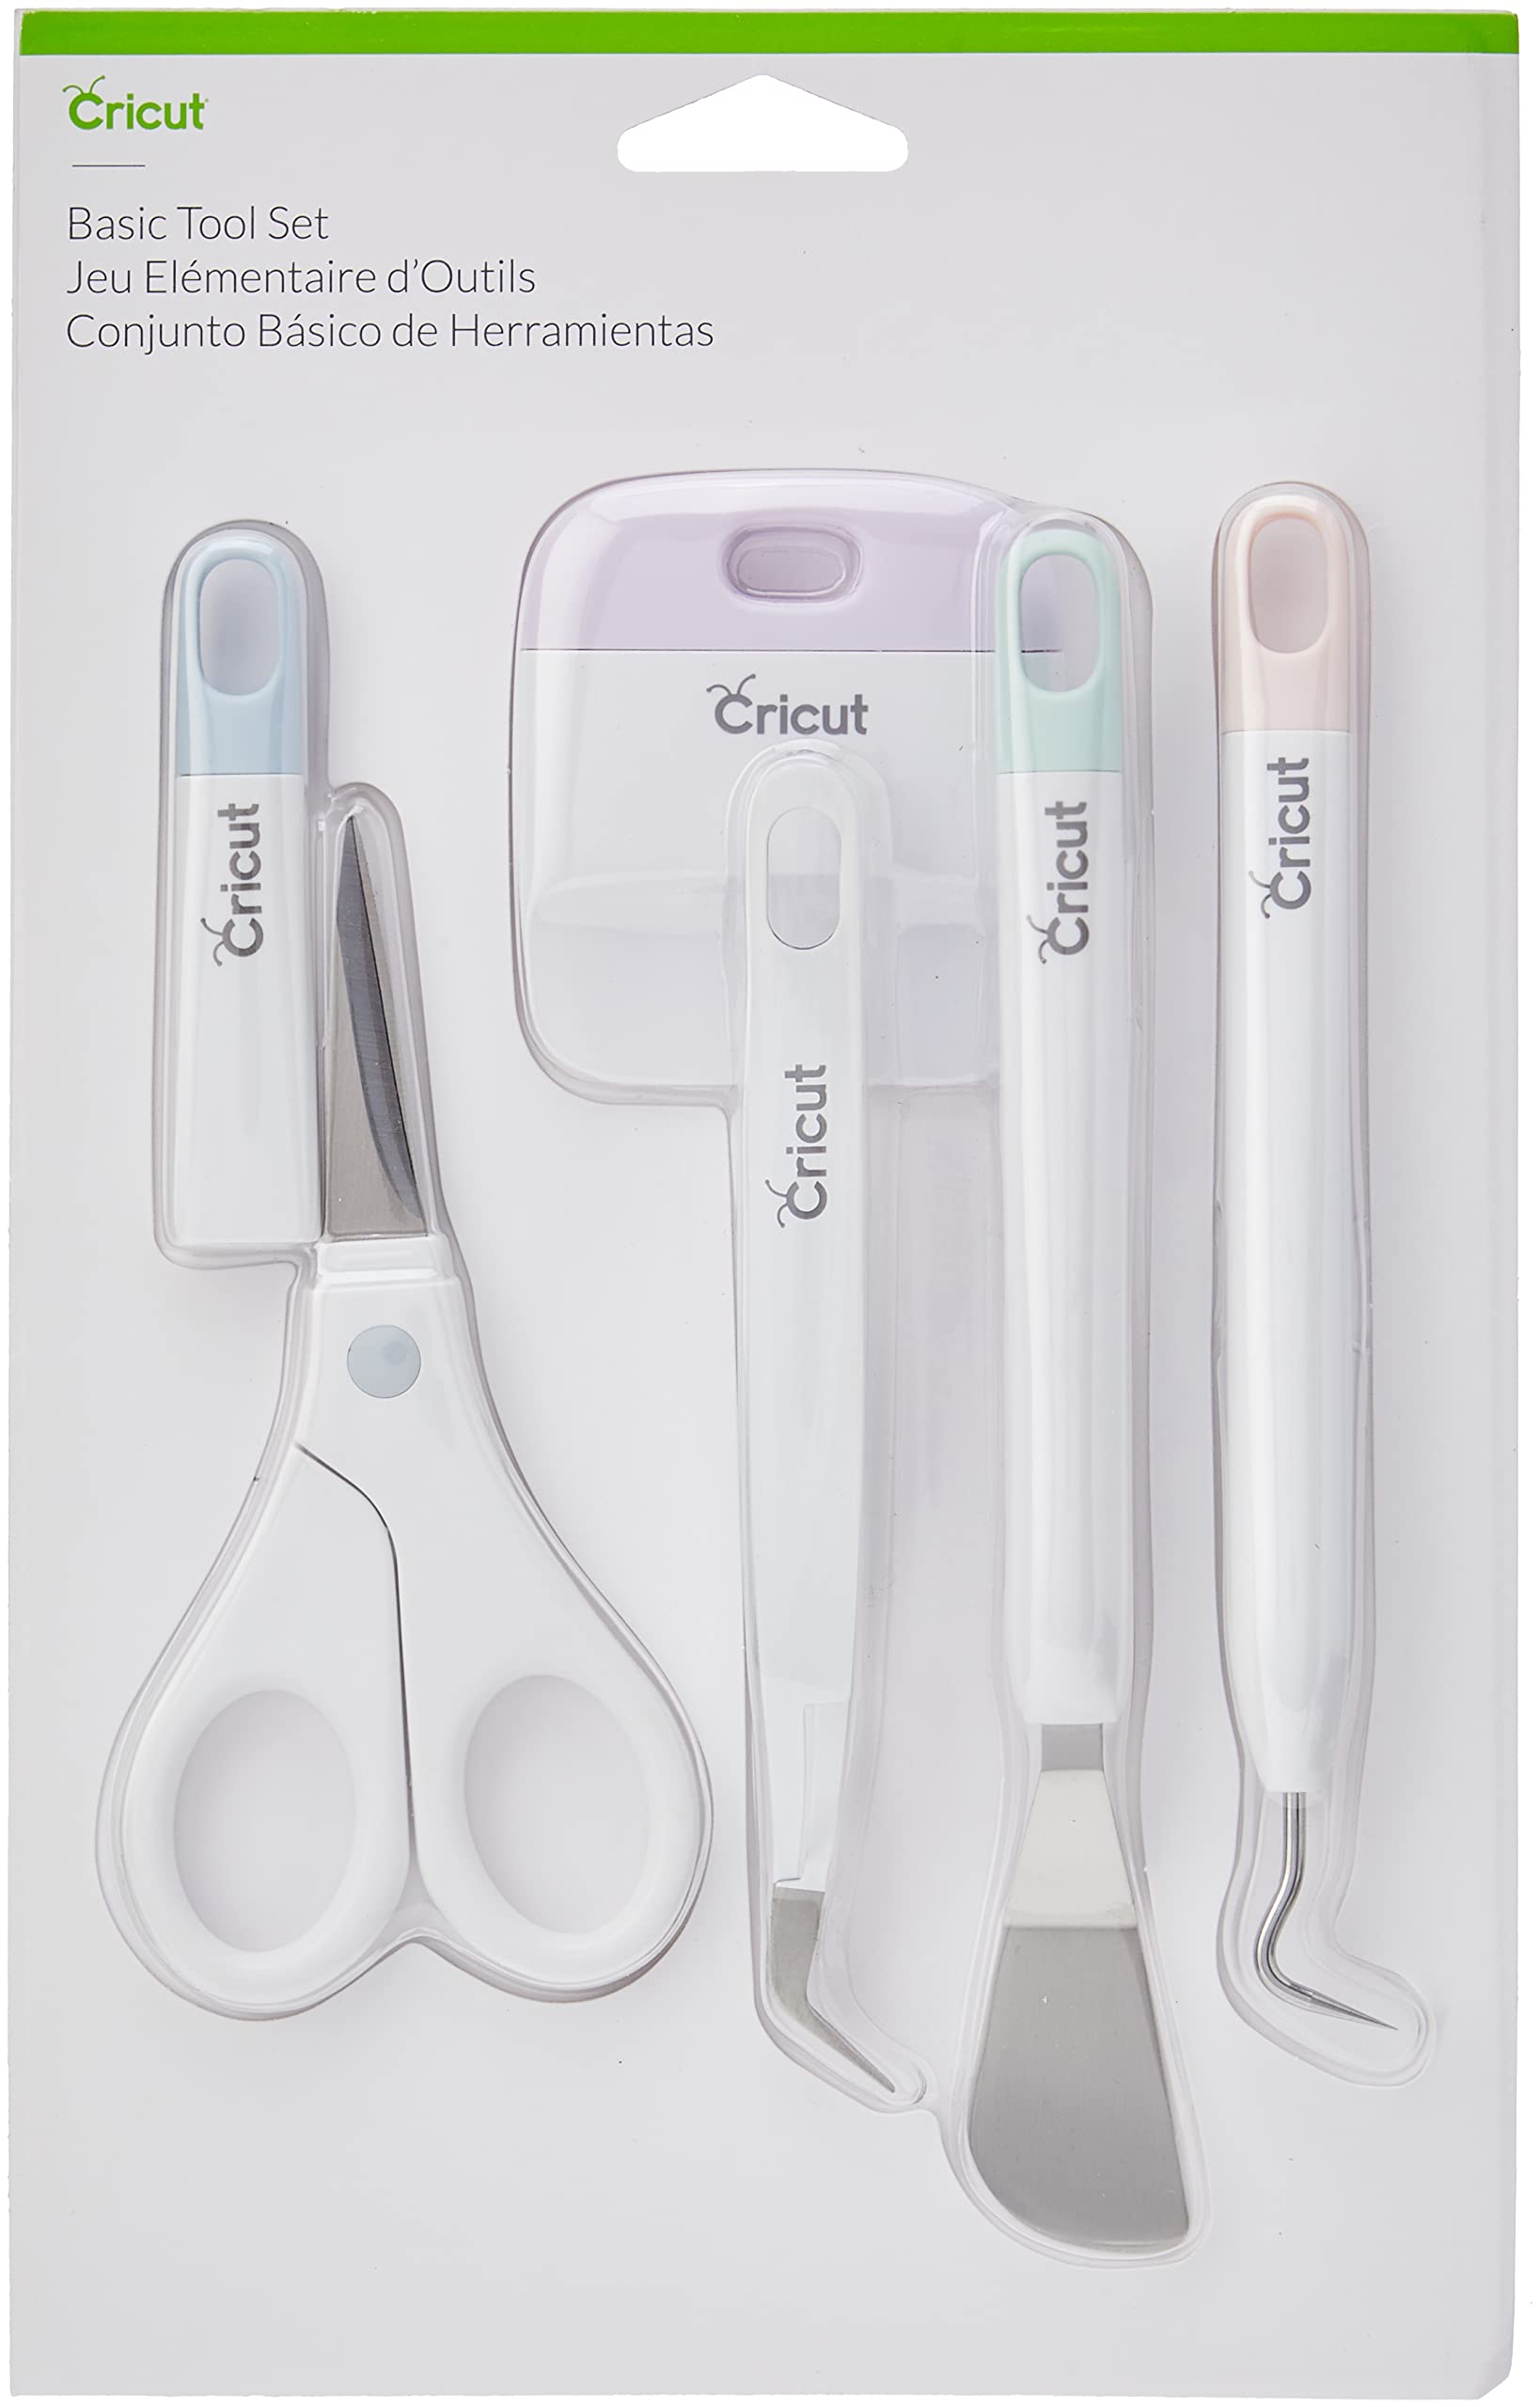 Cricut Basic Tool Set - 5-Piece Precision Tool Kit for Crafting and DIYs,  Perfect for Vinyl, Paper & Iron-on Projects, Great Companion for Cricut  Cutting Machines, Core Colors Basic Set Core Colors